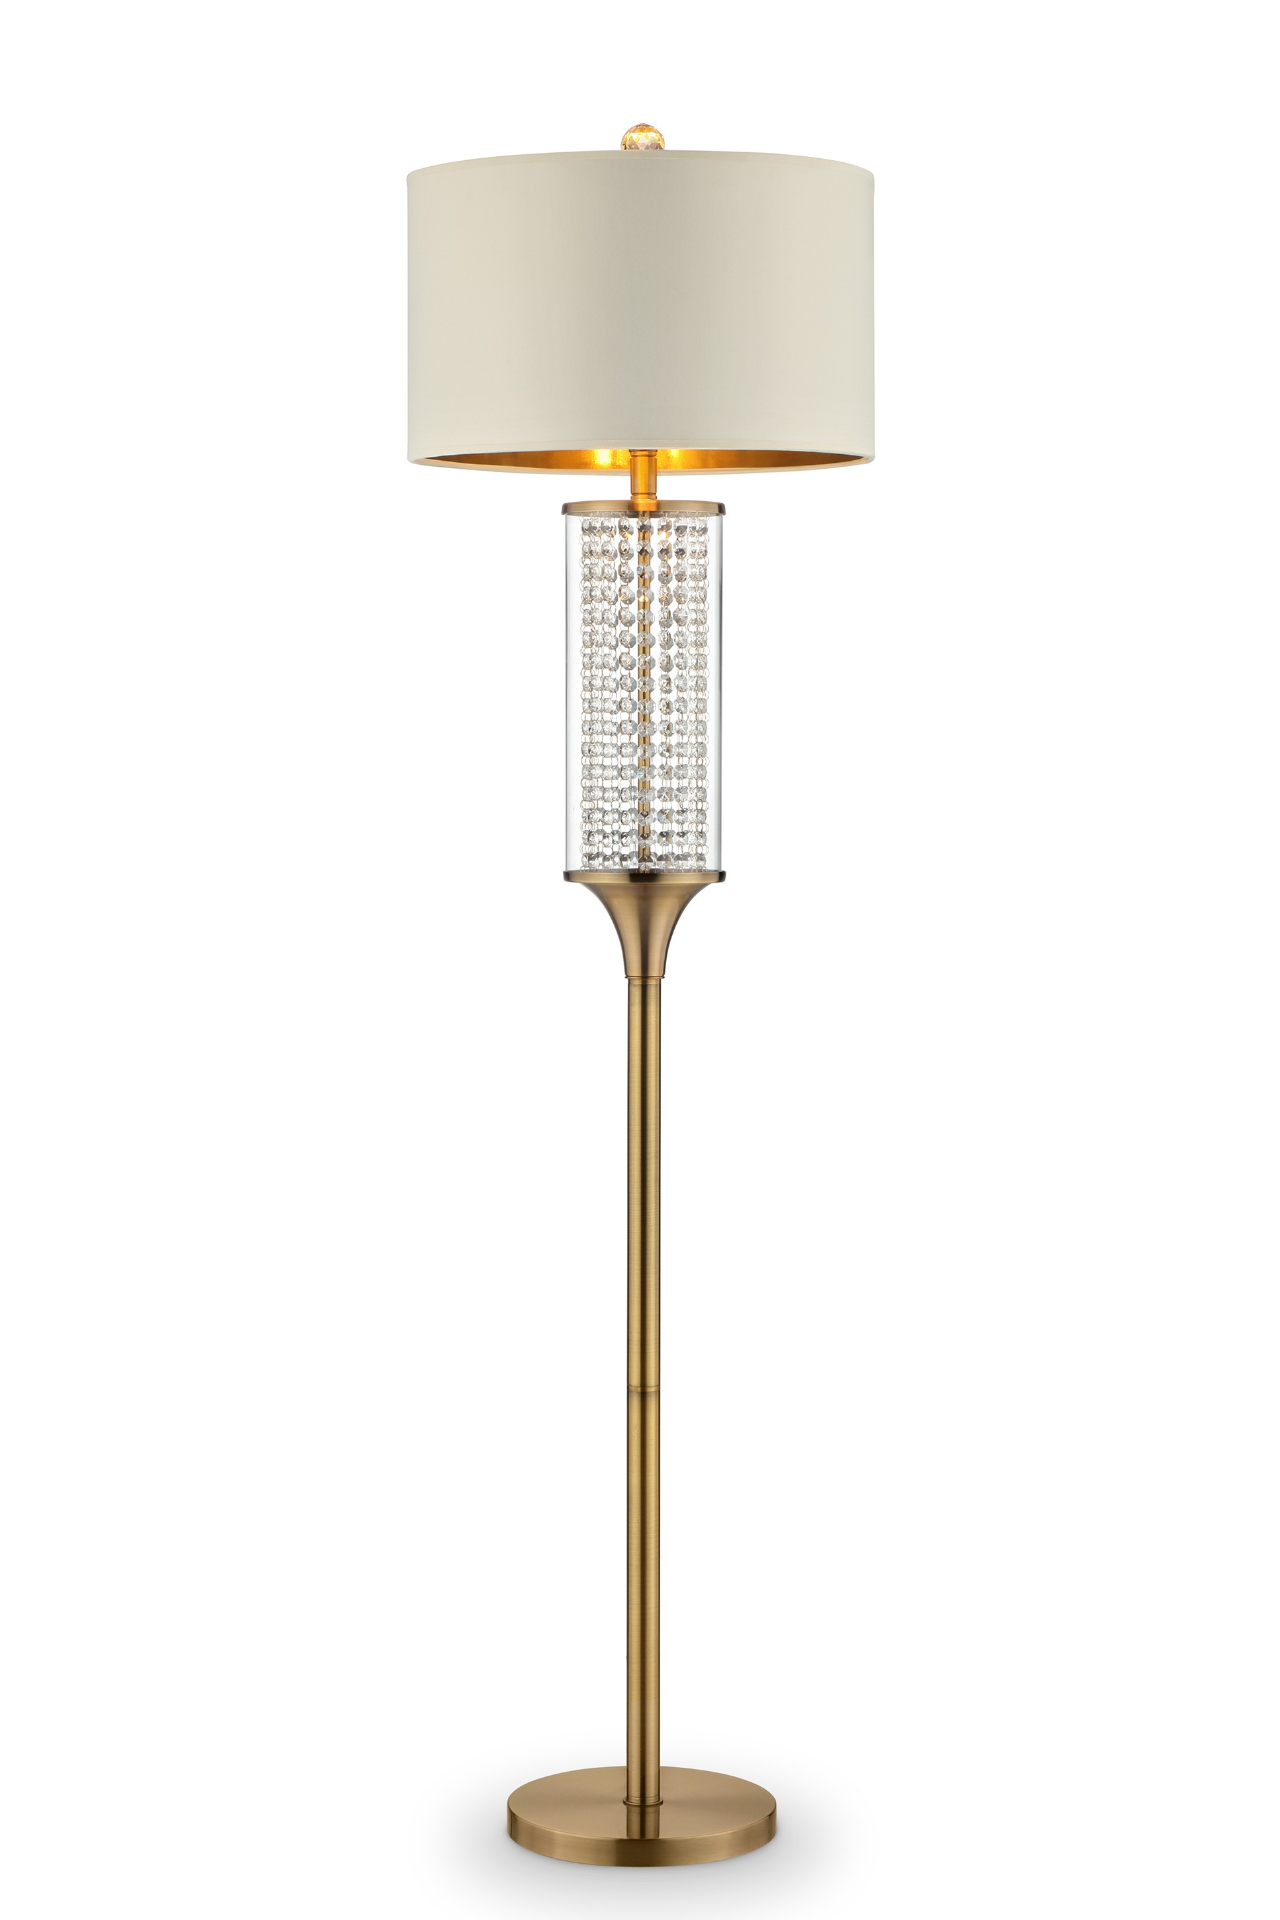 Luxurious Gold Tone Floor Lamp With Off-White Shade (62.25"H)